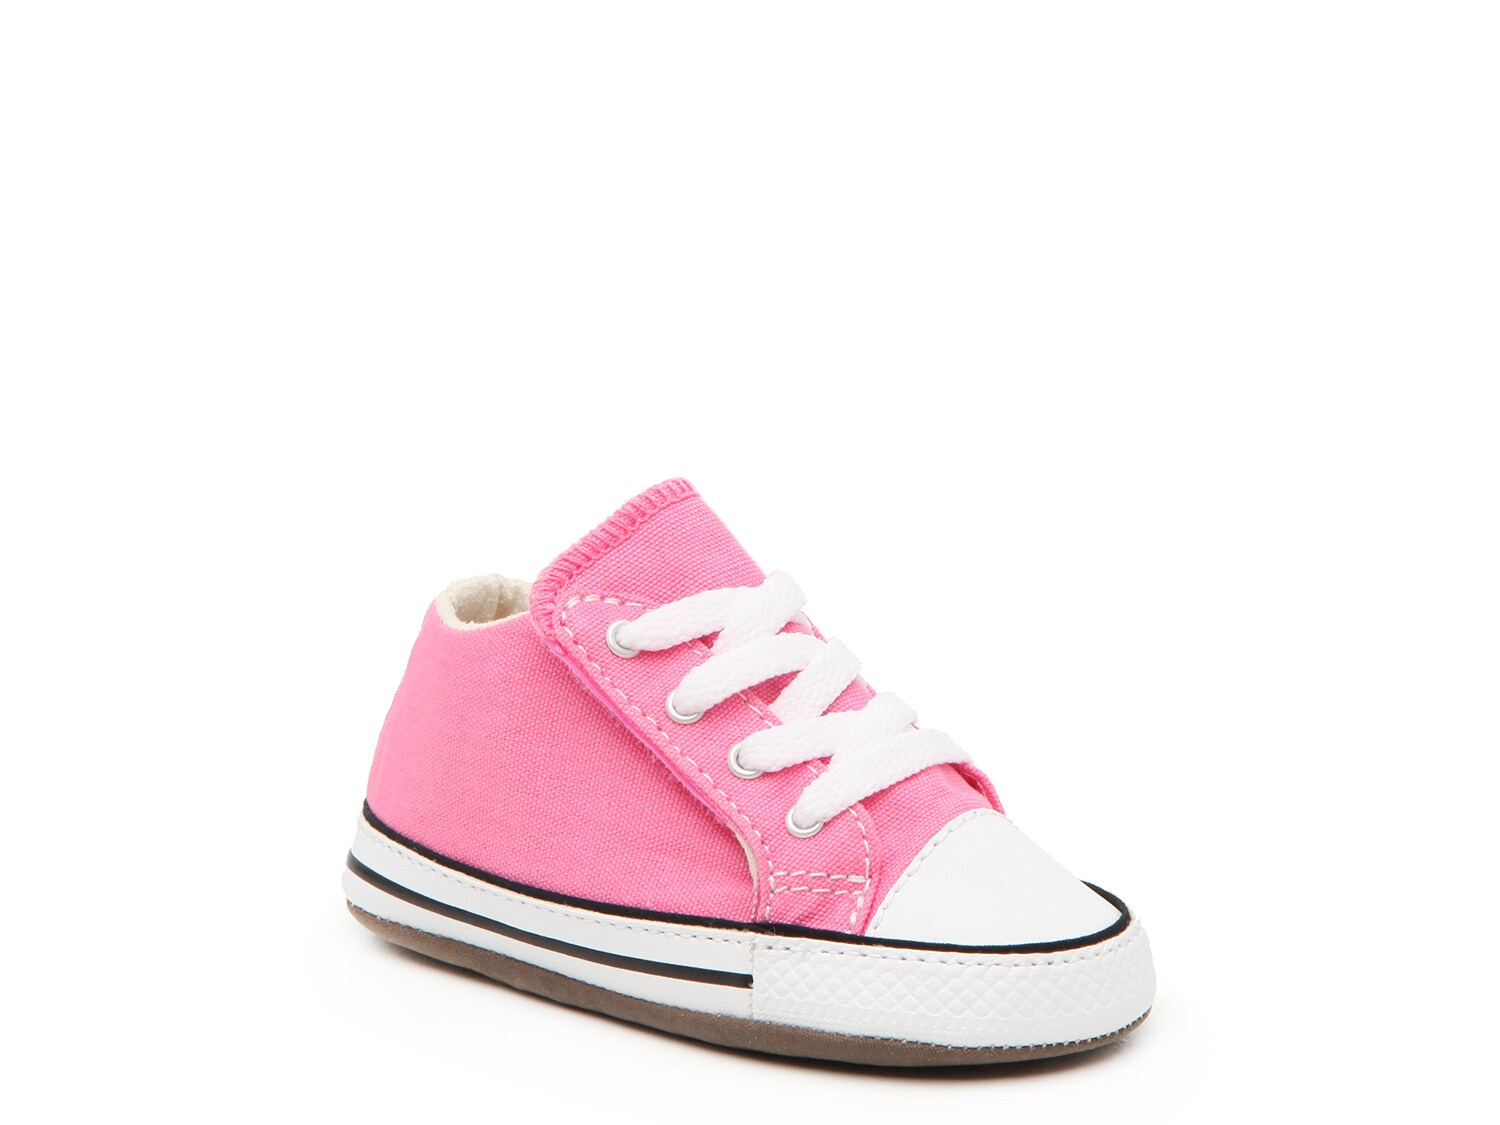 infant girl sneakers size 3